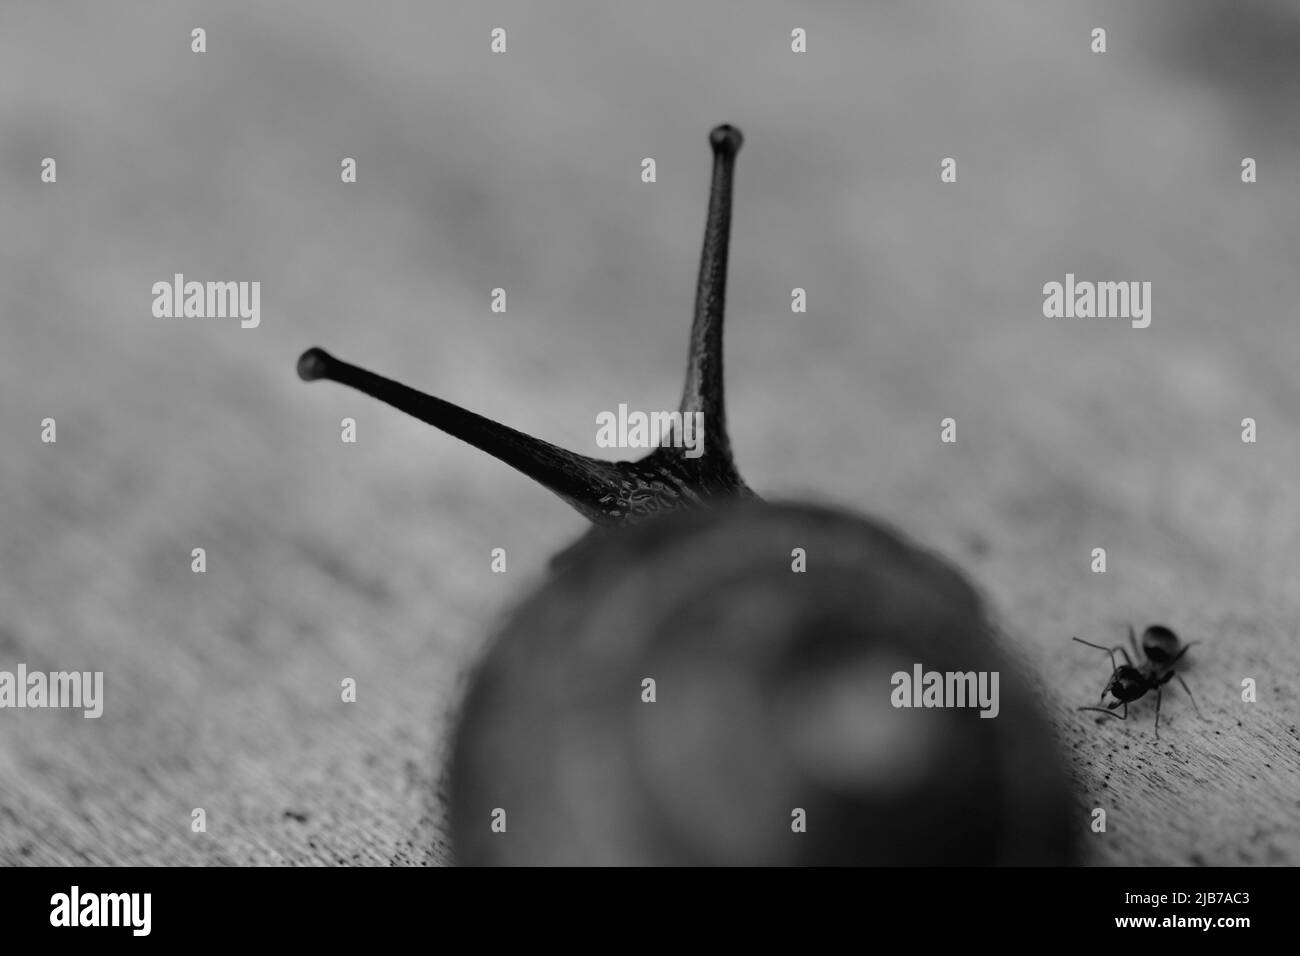 Snail on a wooden garden. The snail glides on the wet wood texture next to the black ant. Macro close-up of a blurred background. Short depth of field Stock Photo